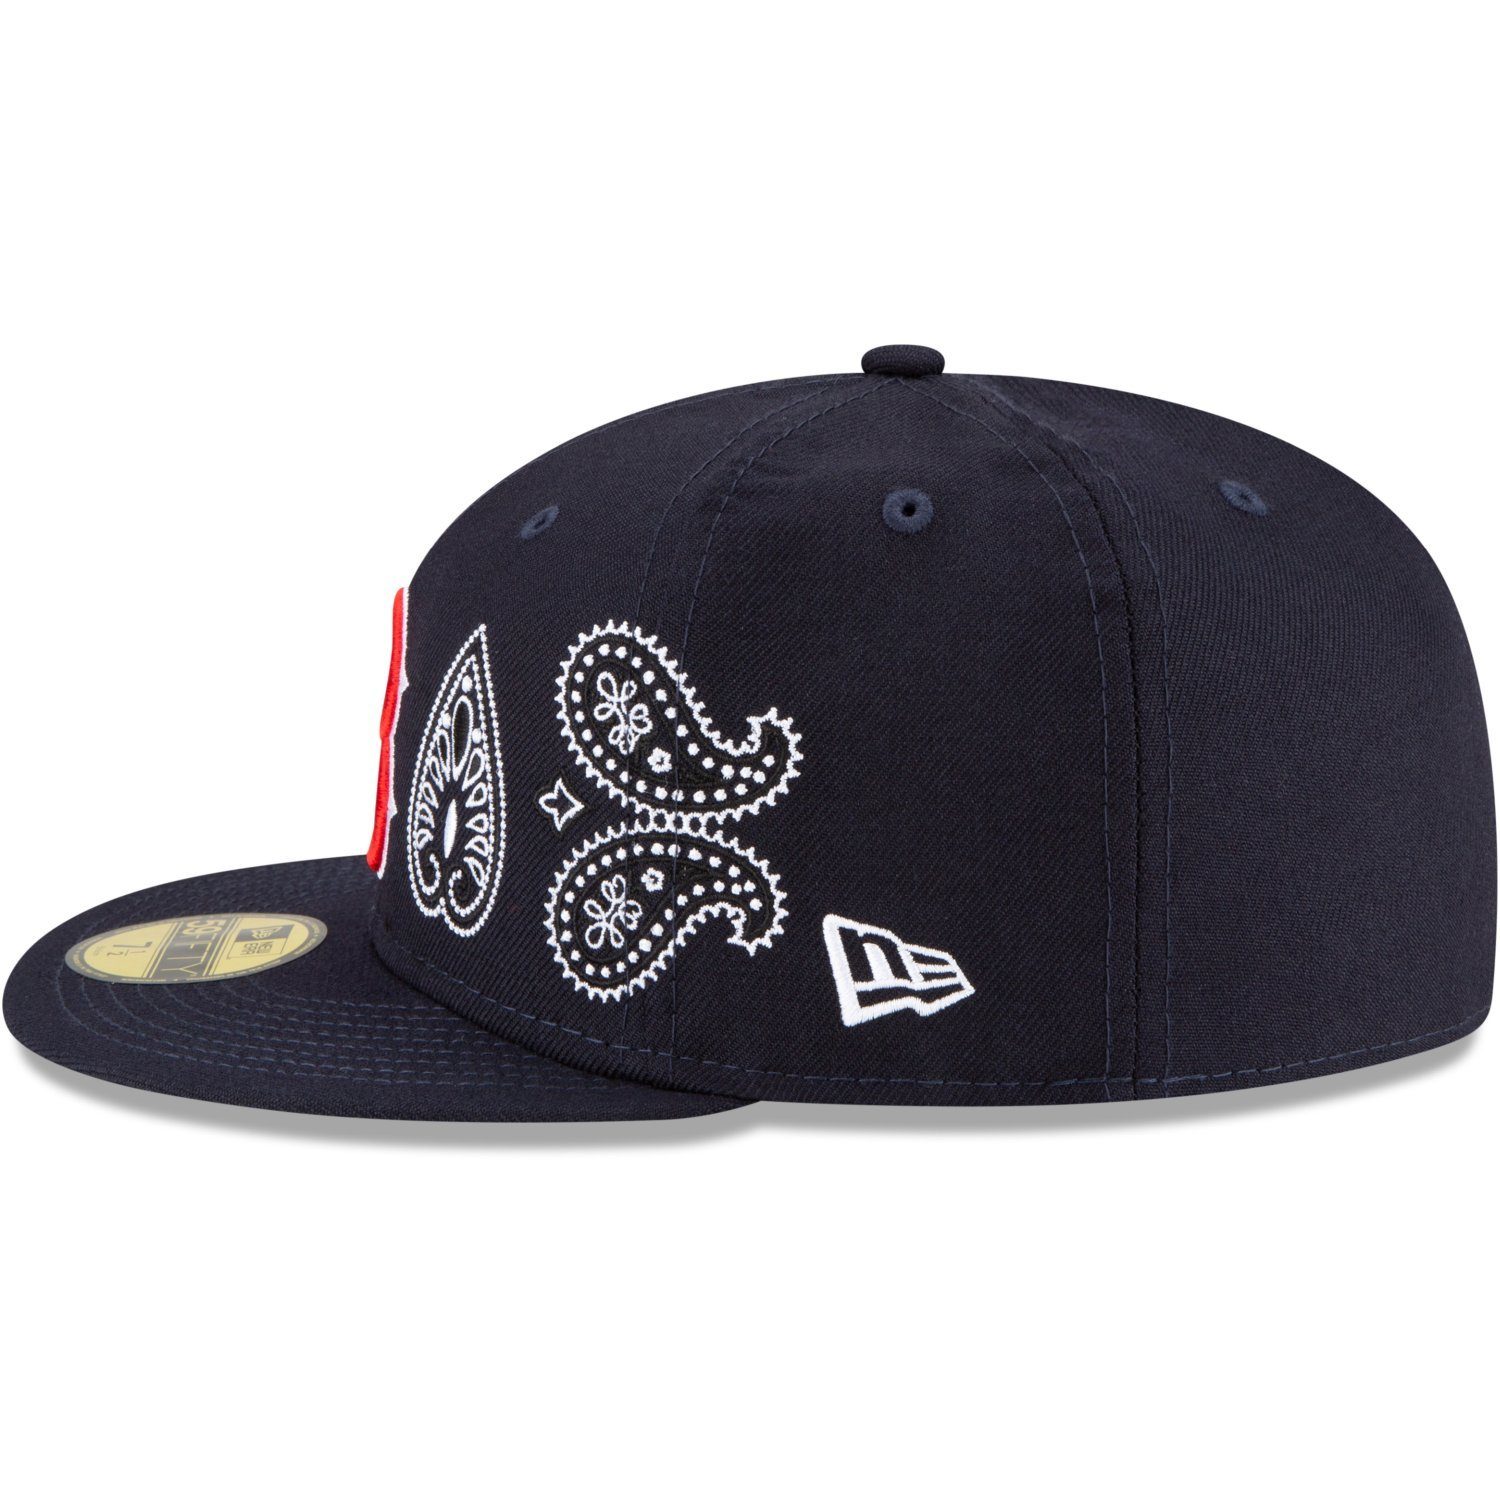 New Era Fitted Cap Red 59Fifty Sox PAISLEY Boston